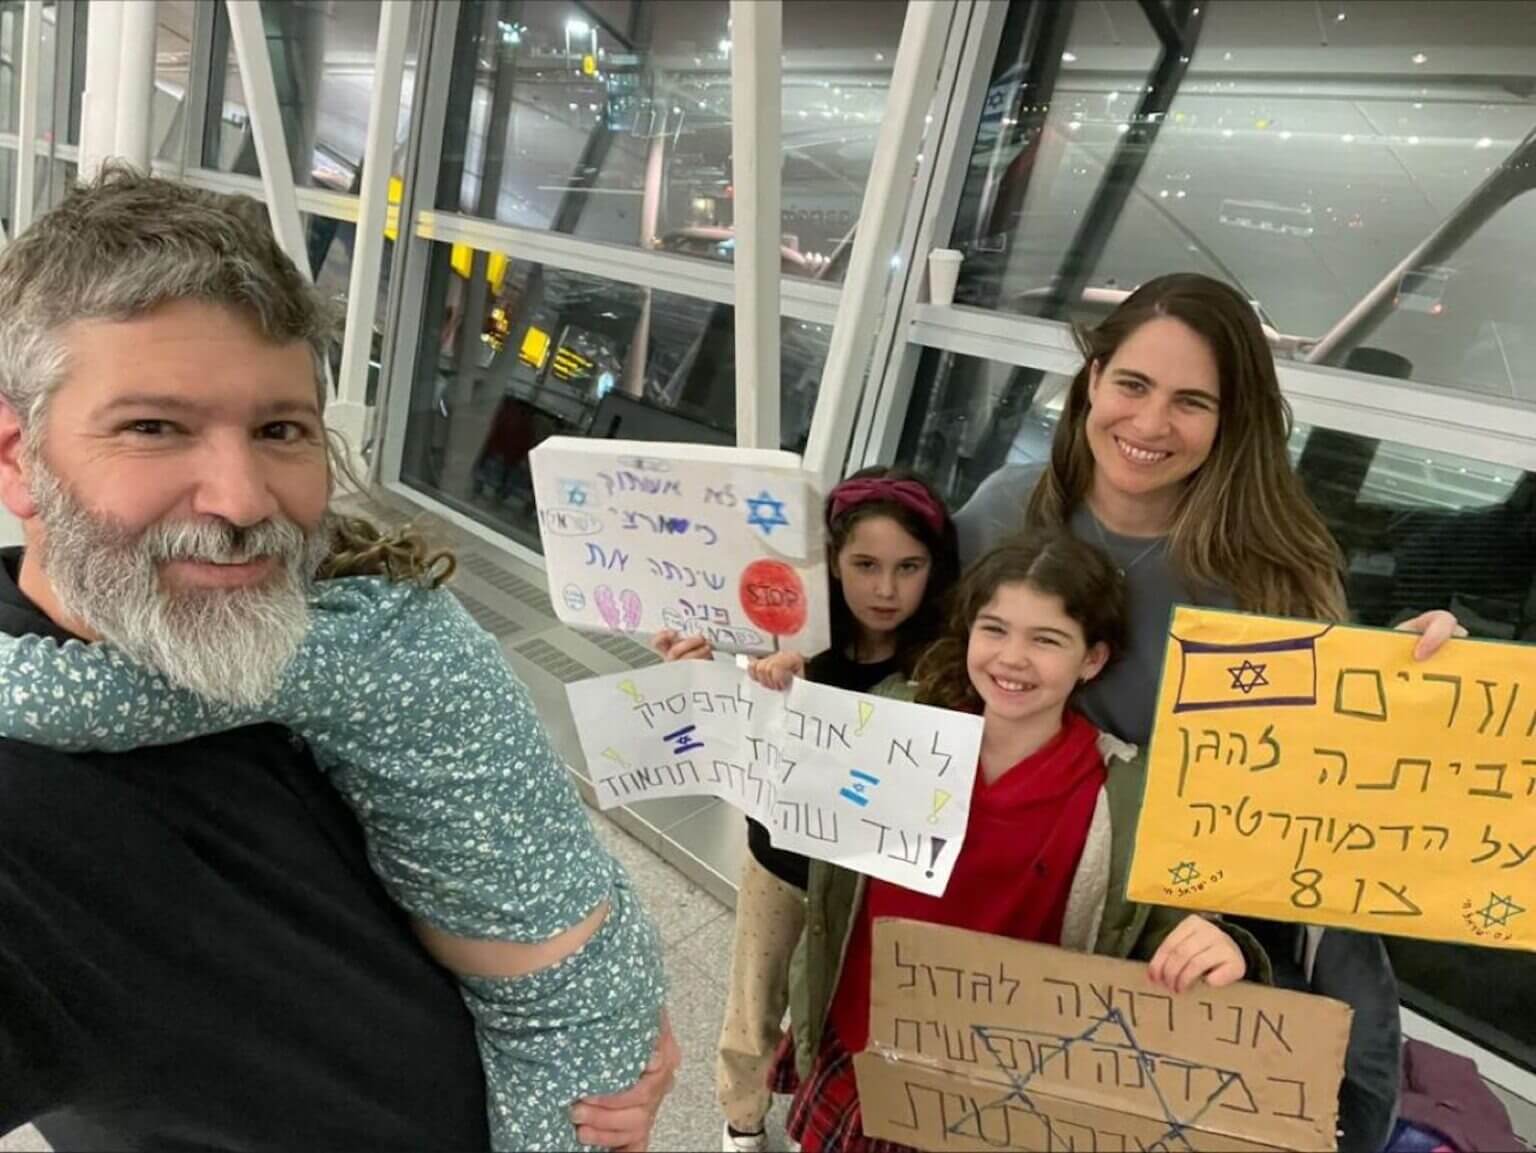 The Breakstone Roth family poses with protest signs in New York City’s John F. Kennedy International Airport en route to Israel, March 27, 2023. 